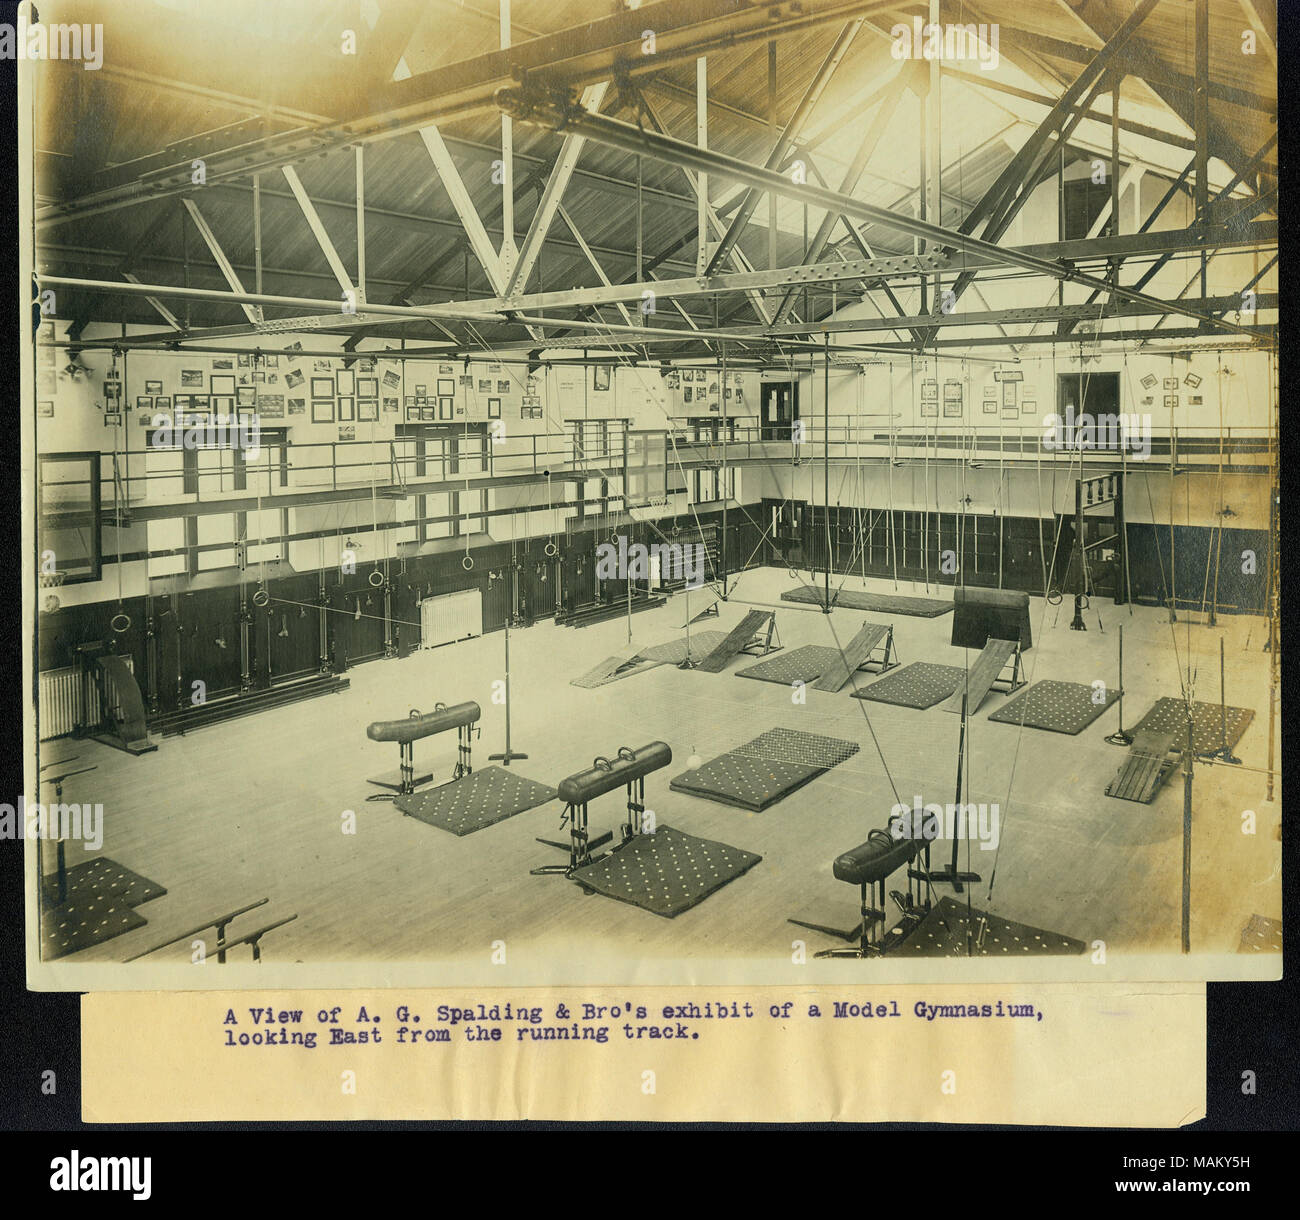 Horizontal photograph of a large interior space for a gym which includes a lot of gymnastic equipment such as pommel horses and rings as well as nets. There is a running rack around the top half of the gym. Title: 'A view of A. G. Spalding and Brothers exhibit of a Model Gymnasium, looking East from the running track'.  . 1904. Stock Photo